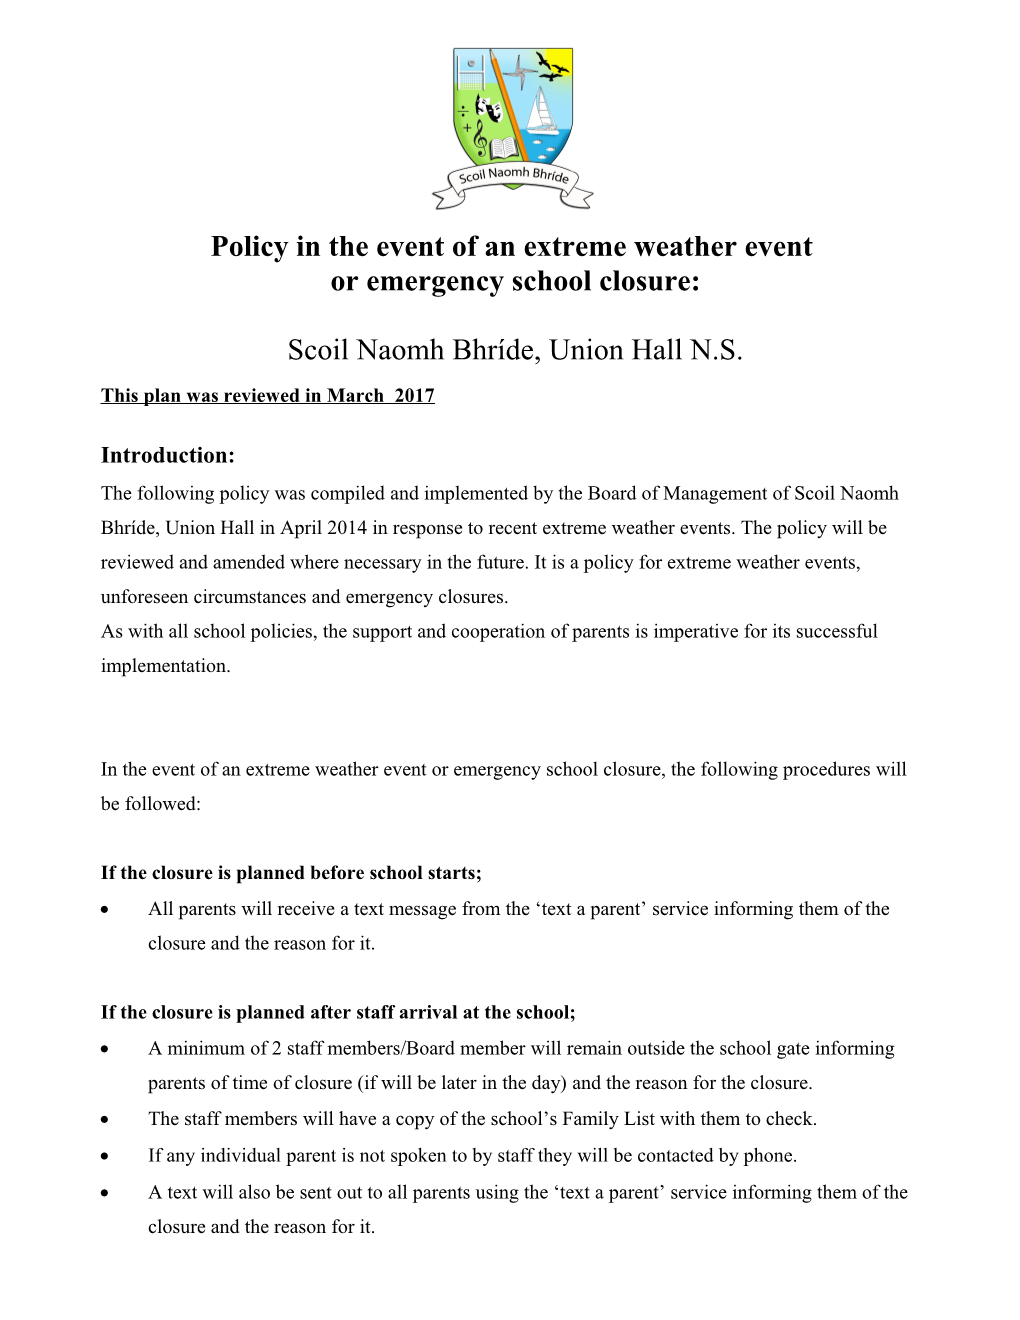 Policy in the Event of an Extreme Weather Event Or Emergency School Closure